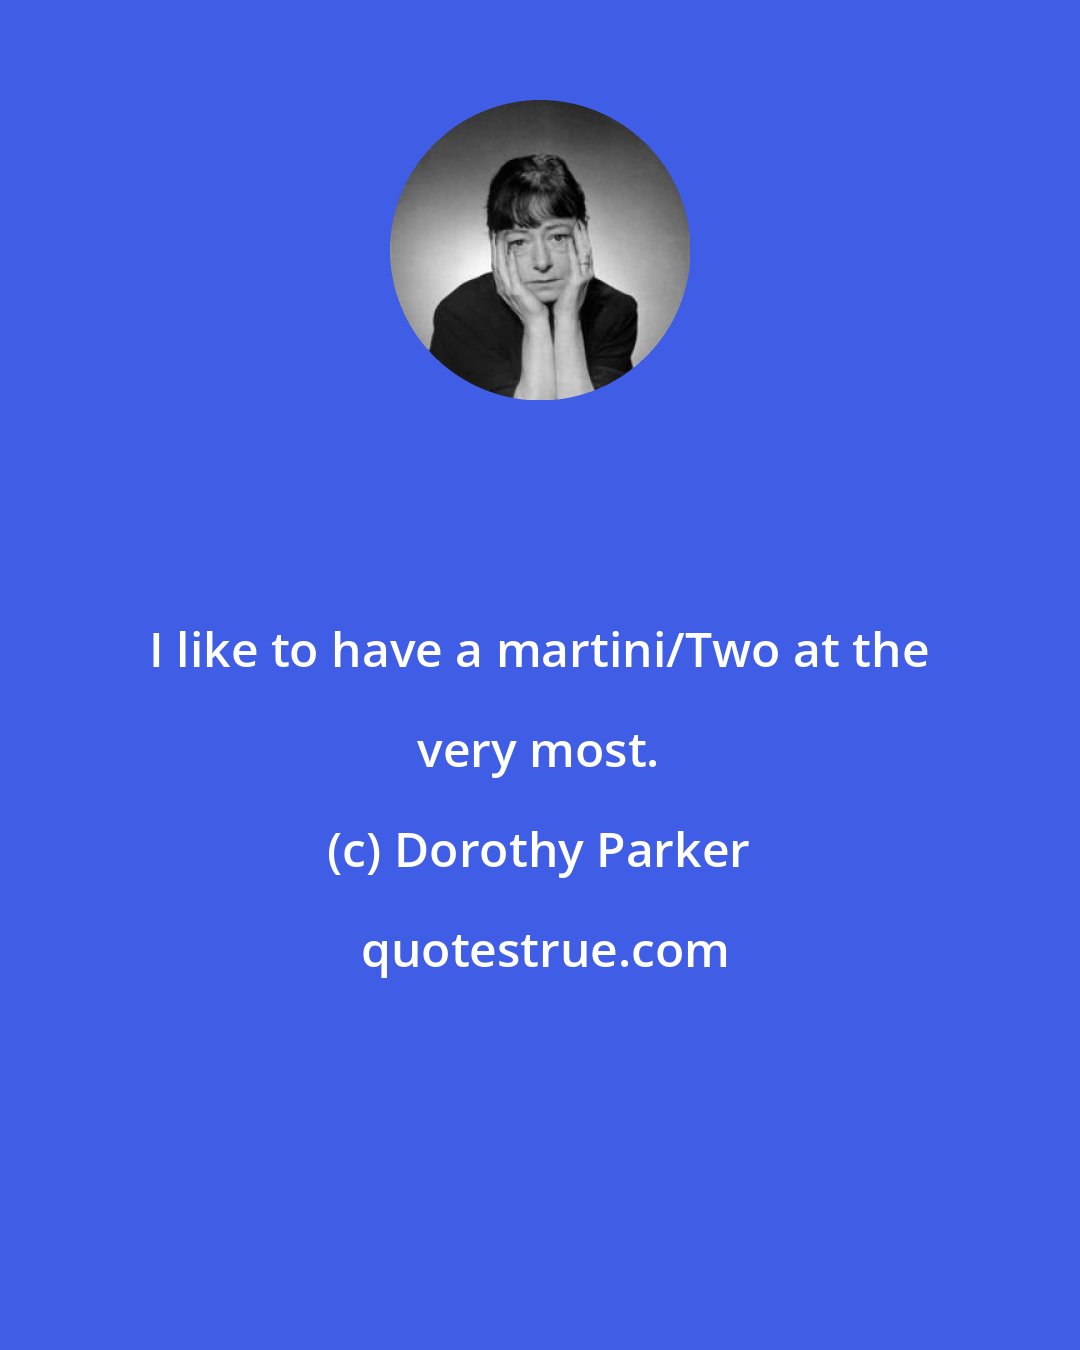 Dorothy Parker: I like to have a martini/Two at the very most.